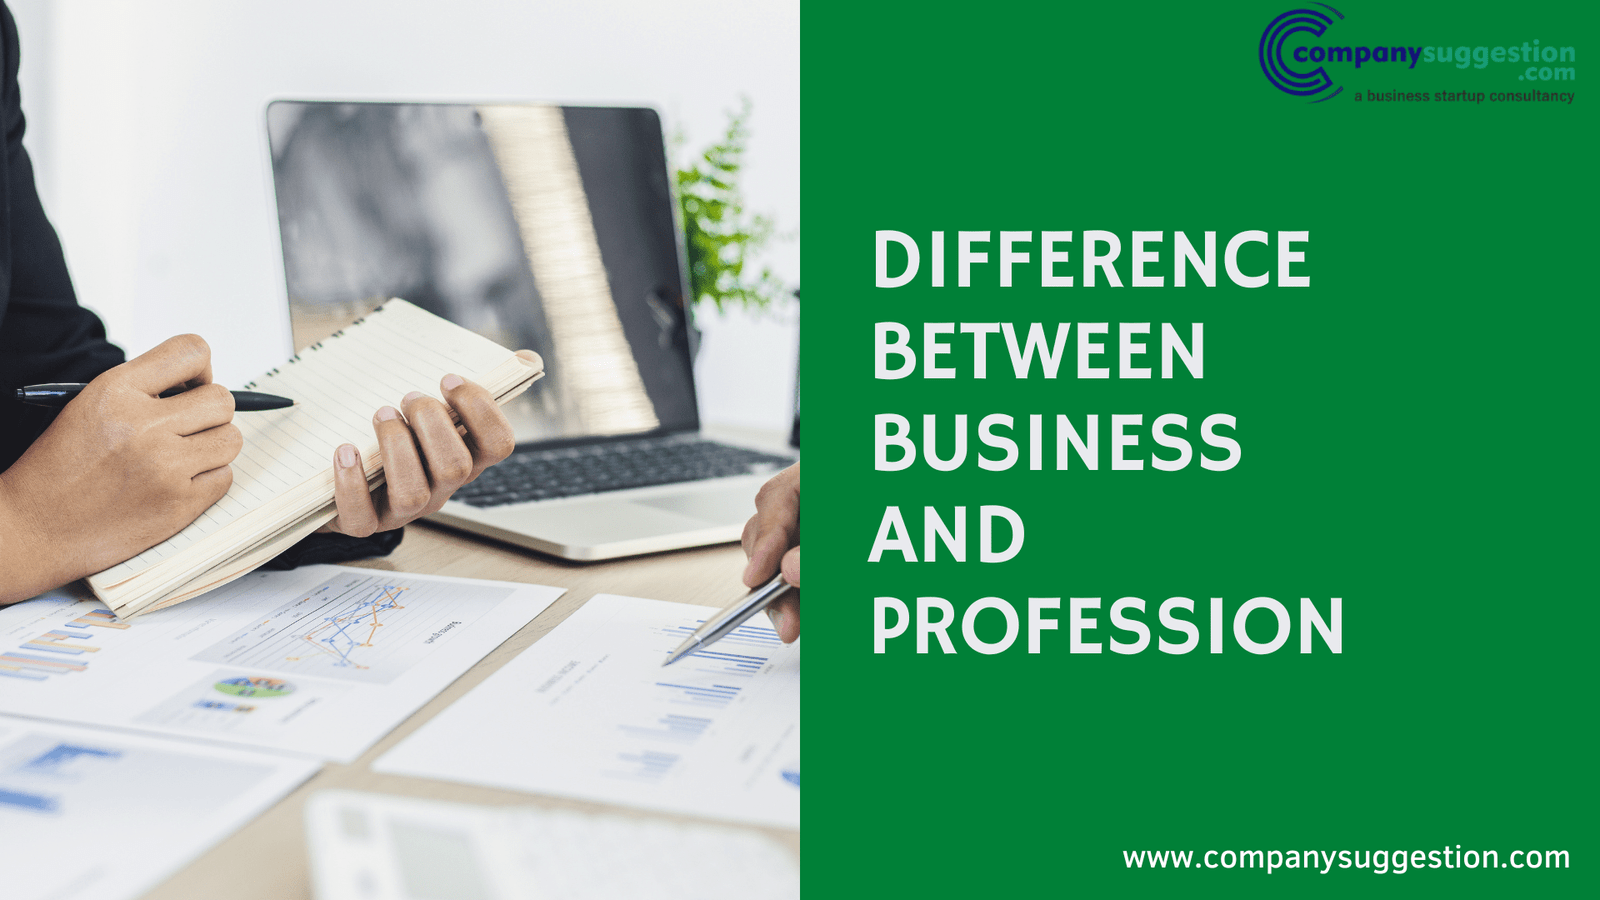 DIFFERENCE BETWEEN BUSINESS AND PROFESSION